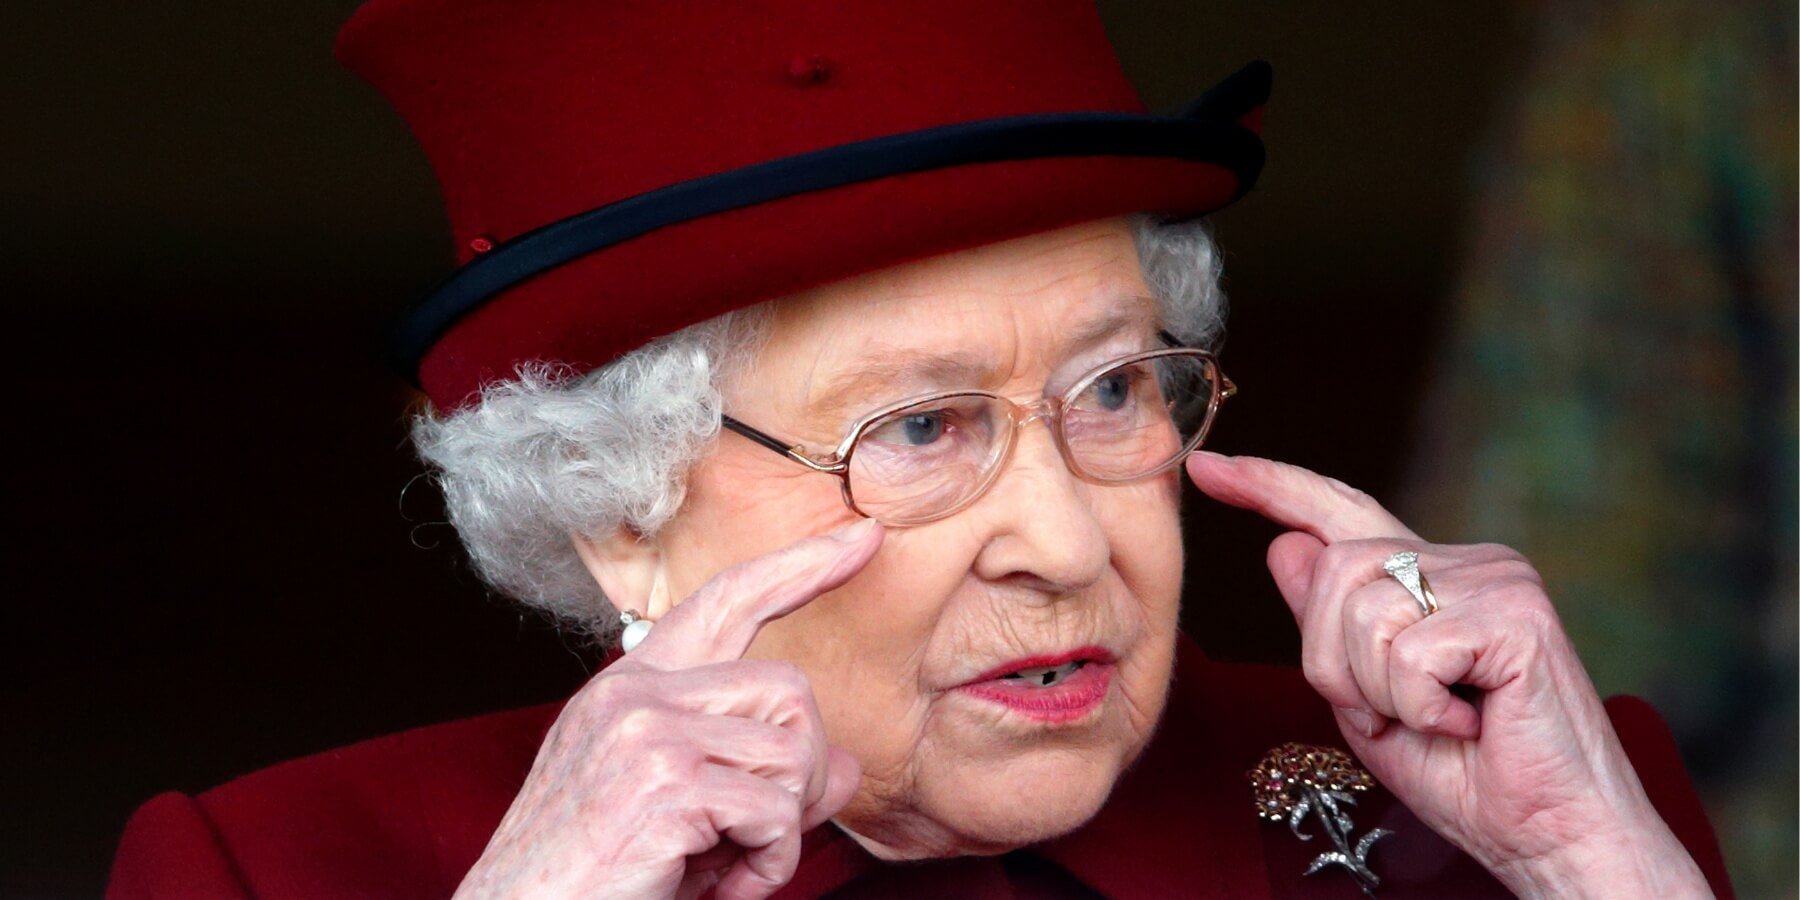 Queen Elizabeth photographed wearing her engagement ring in 2014